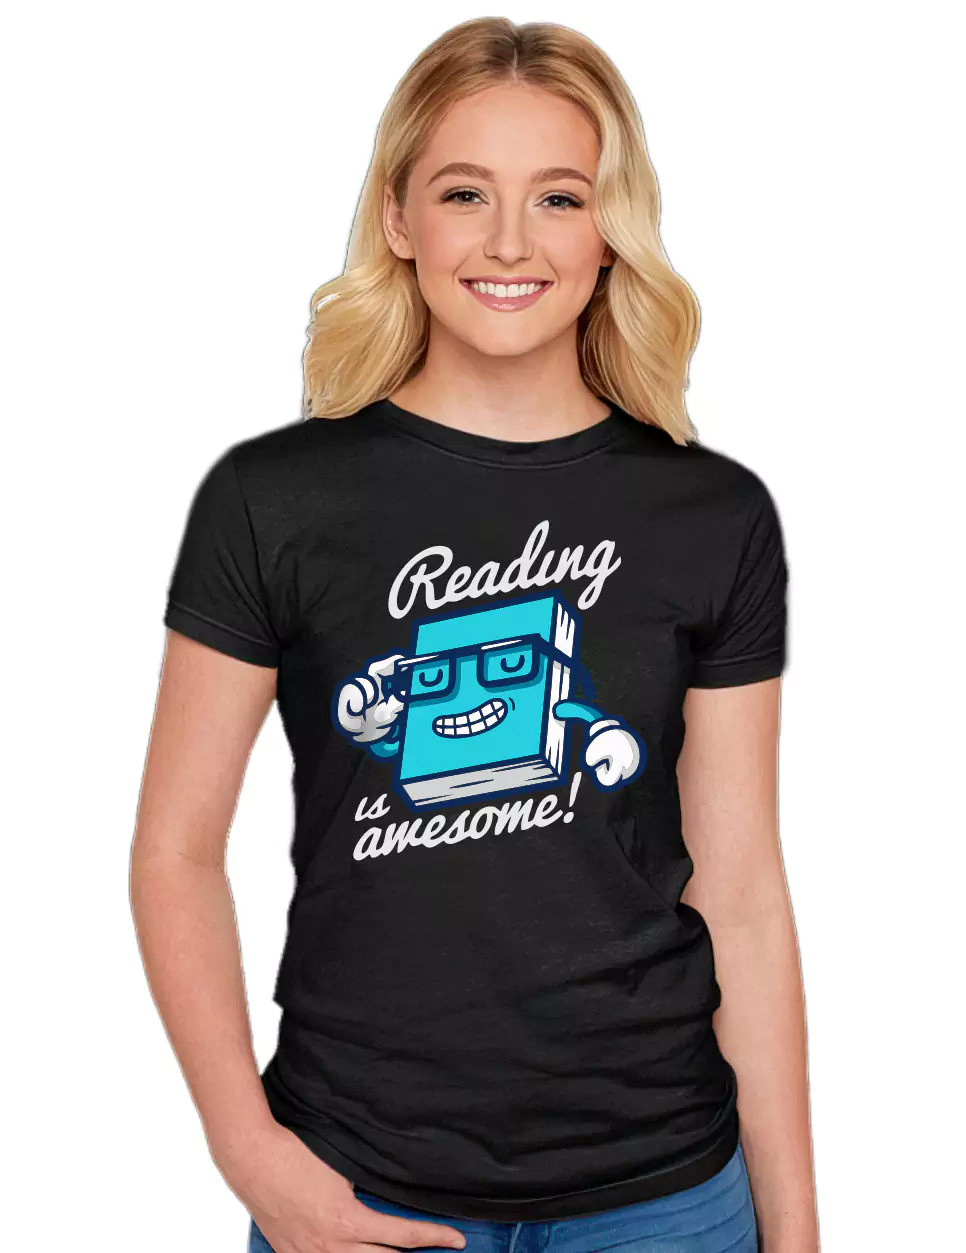 blond girl wearing reading is awesome t shirt